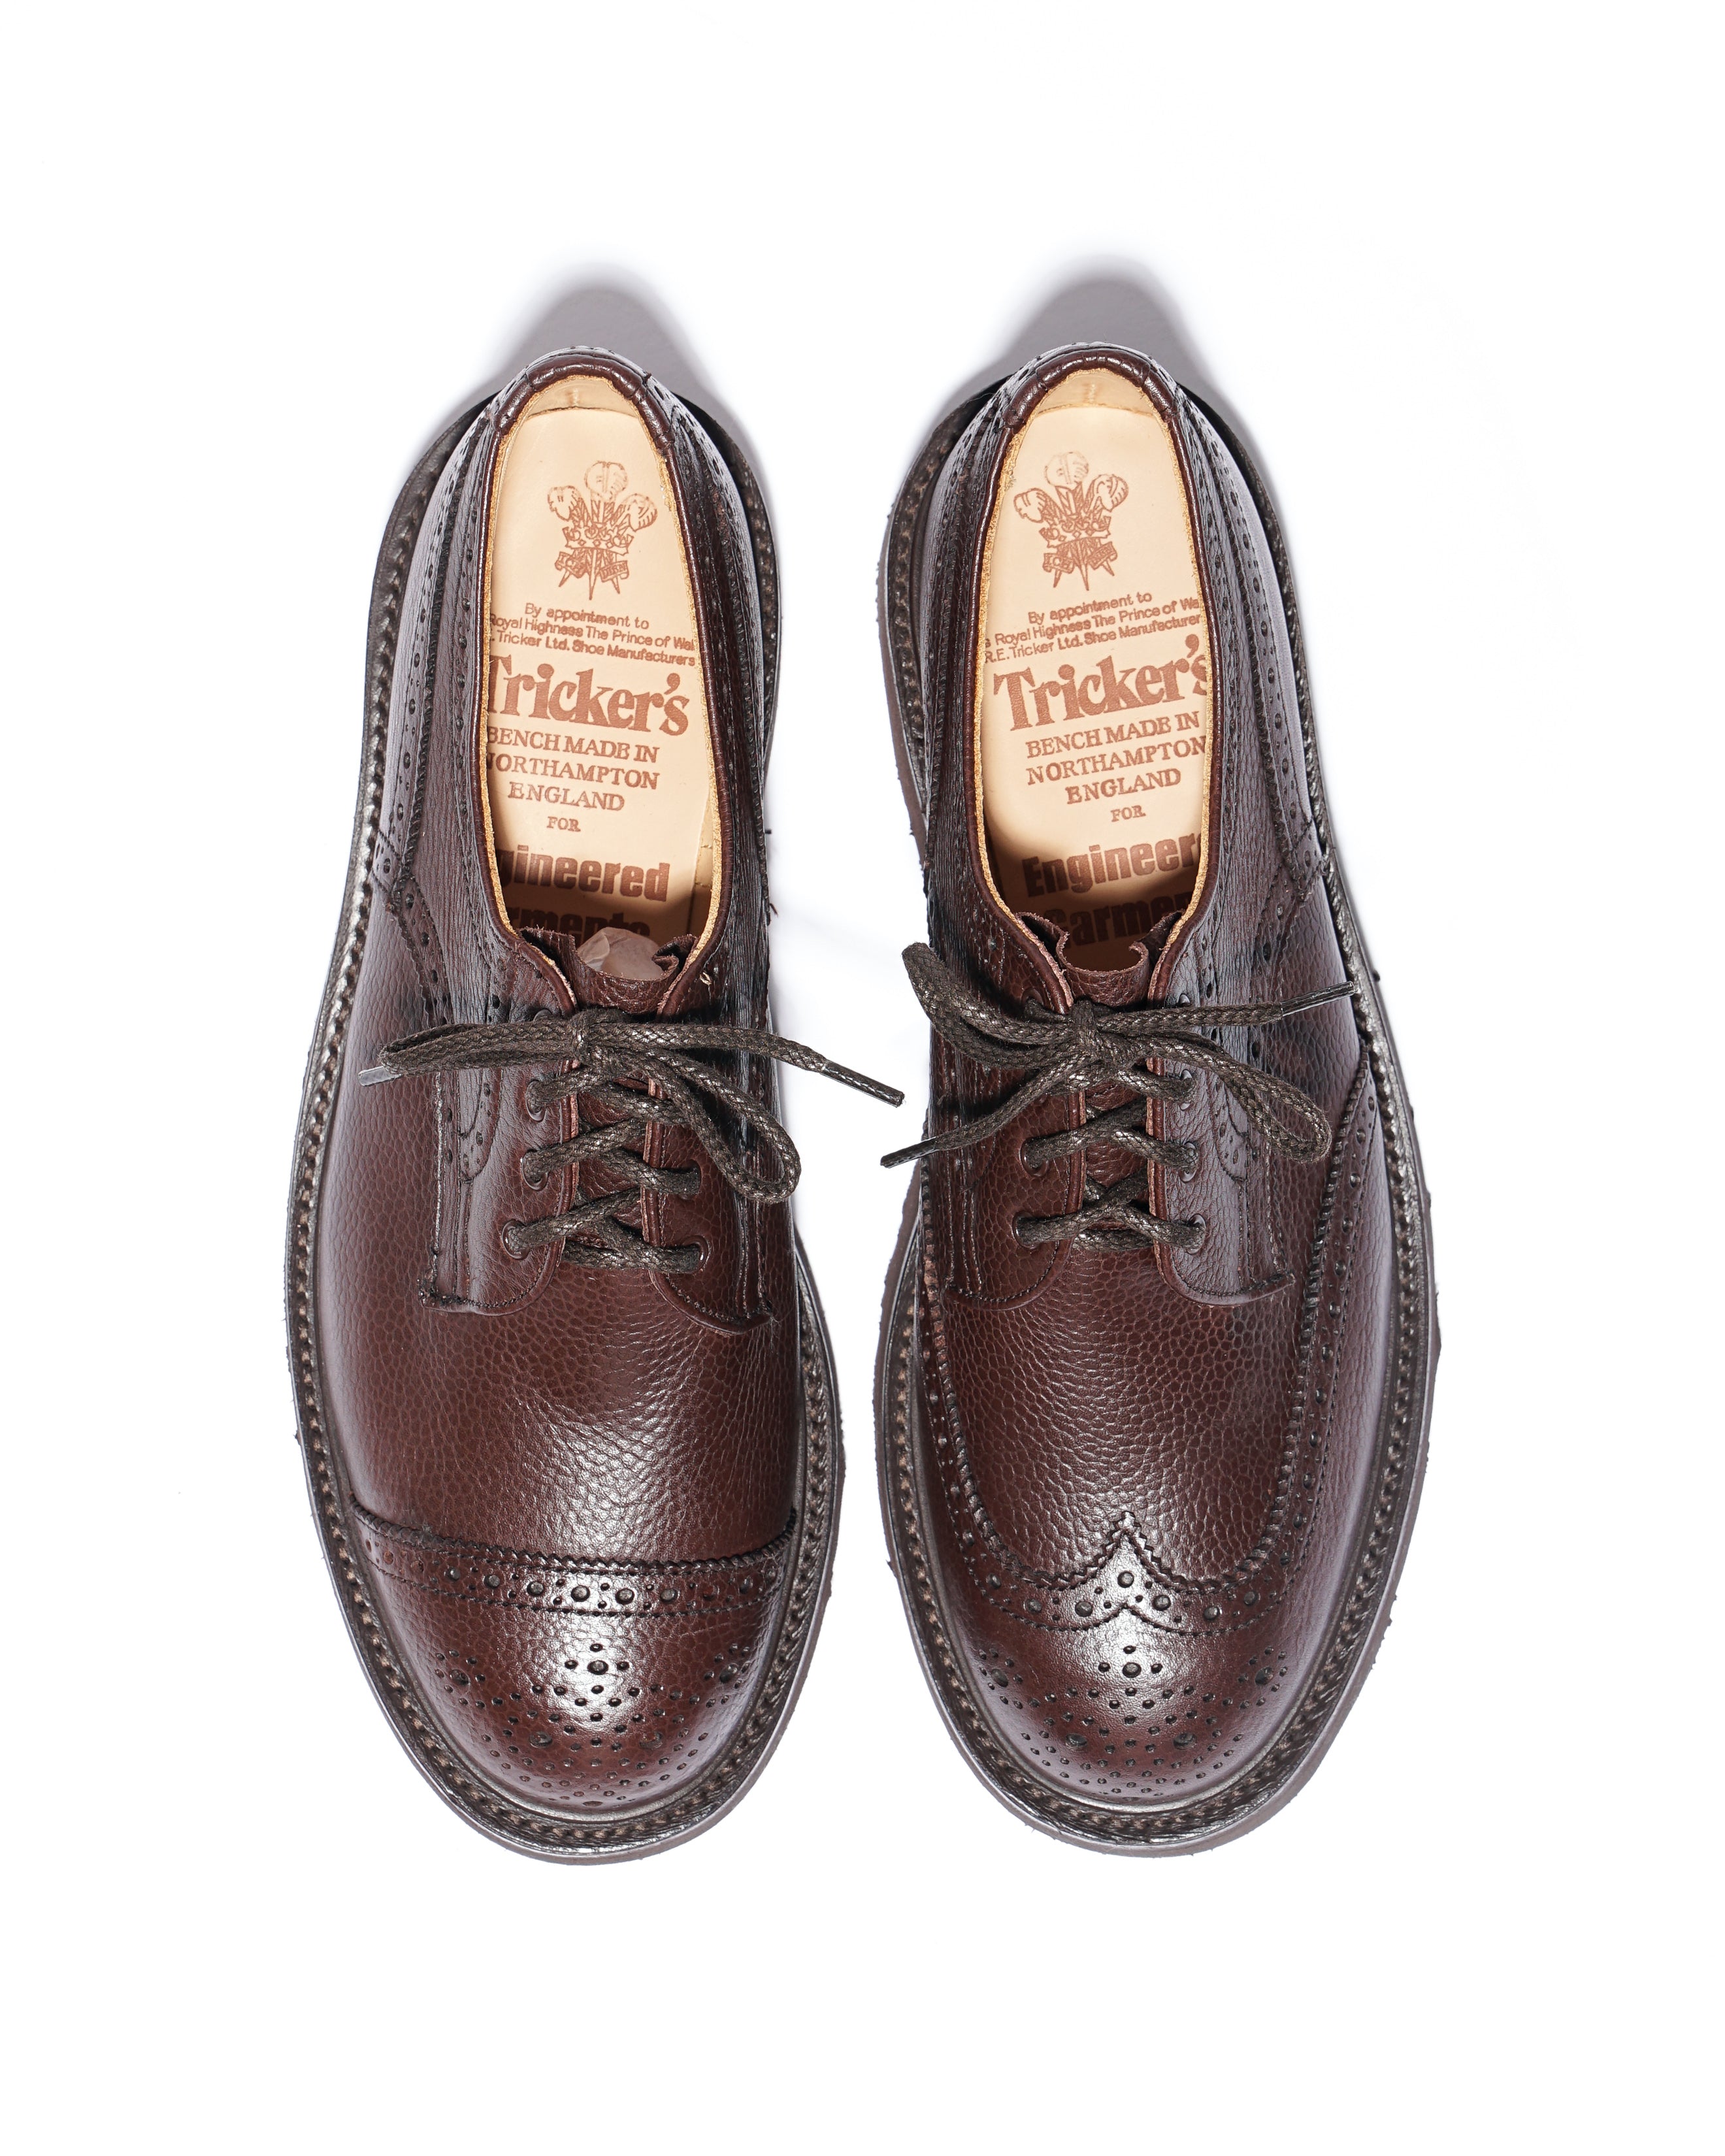 nepenthes × tricker's asymmetric Gibson